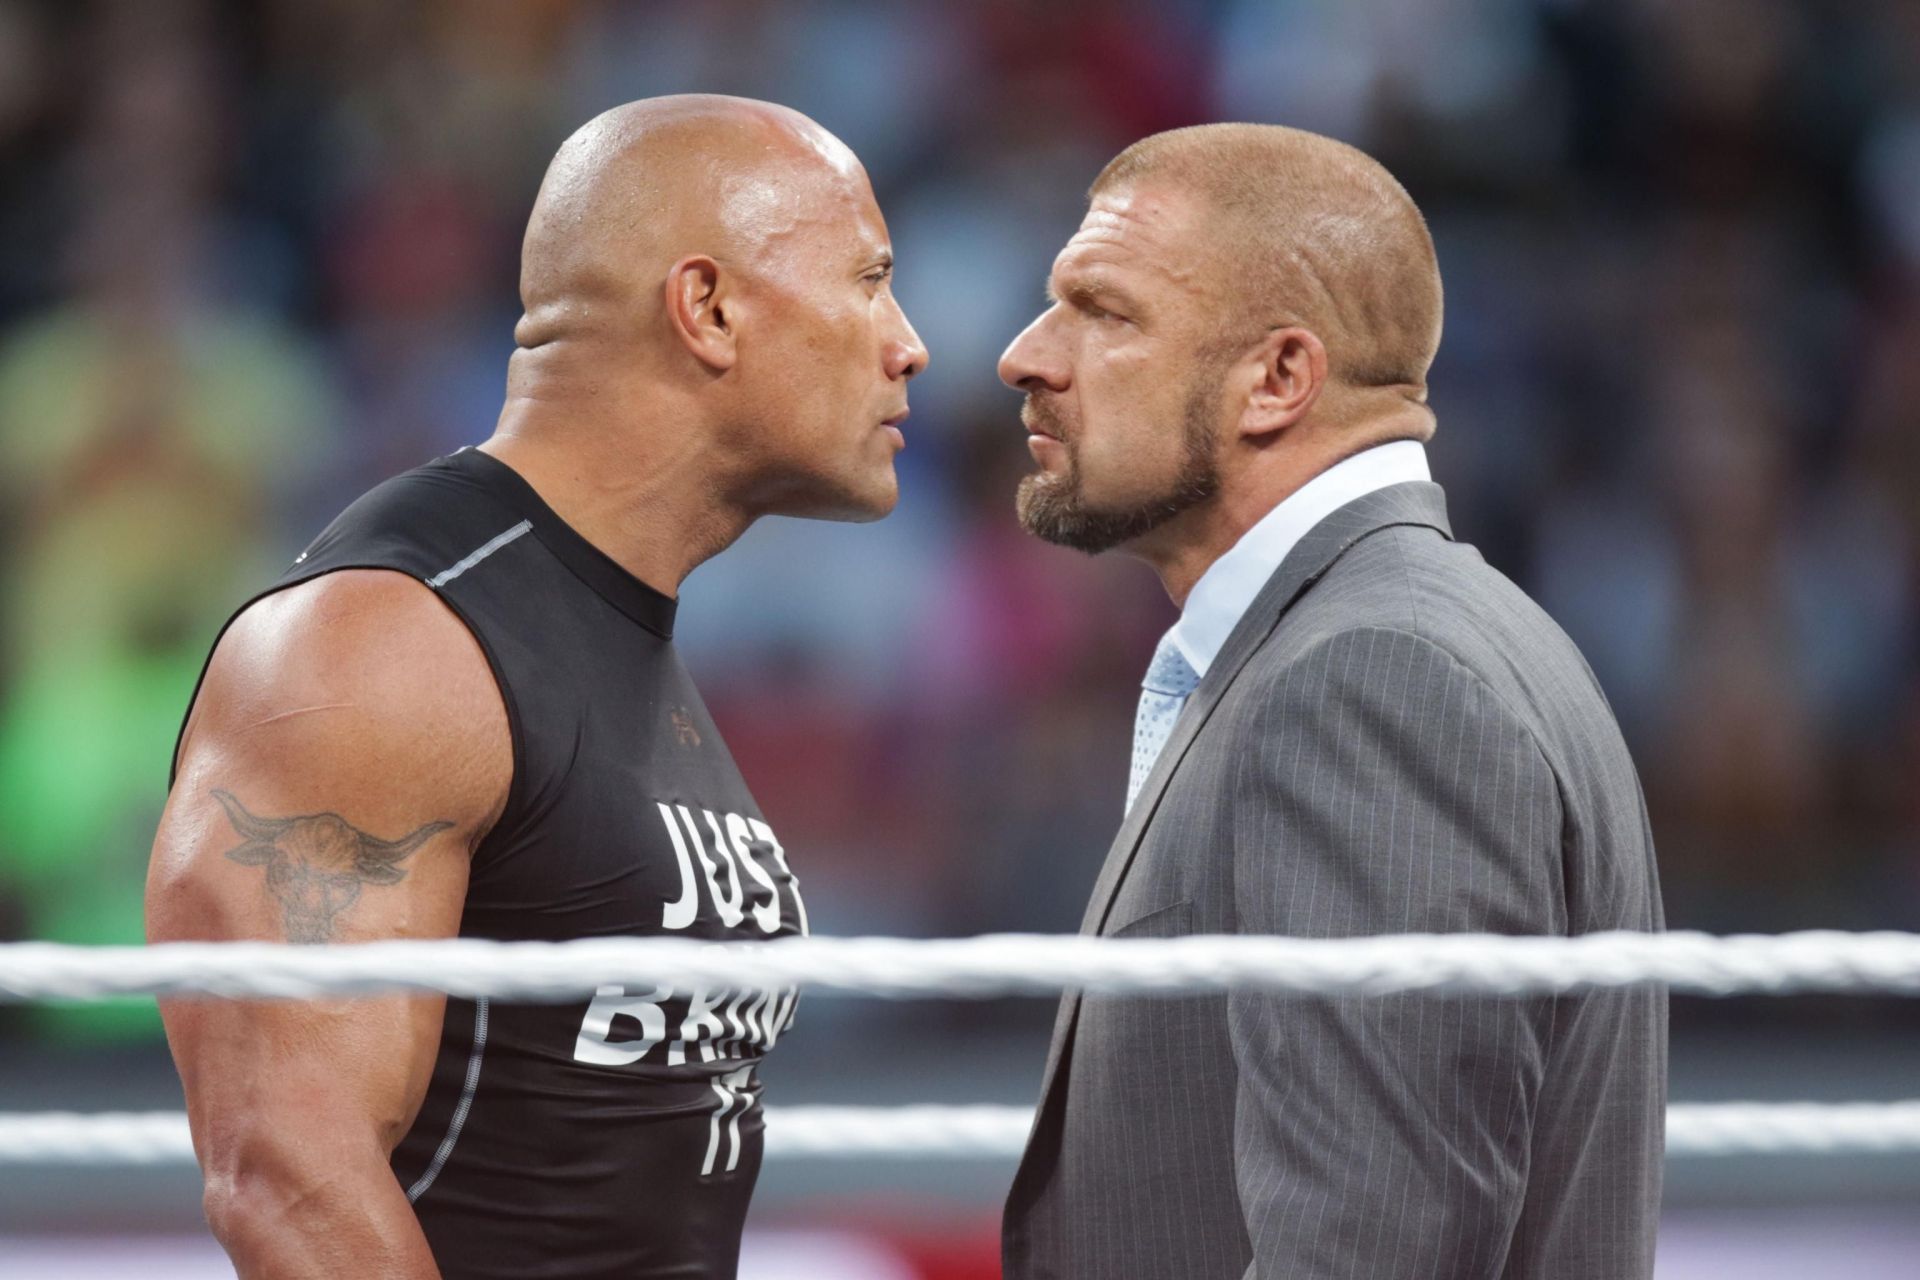 Triple H and The Rock go back a long way in WWE.